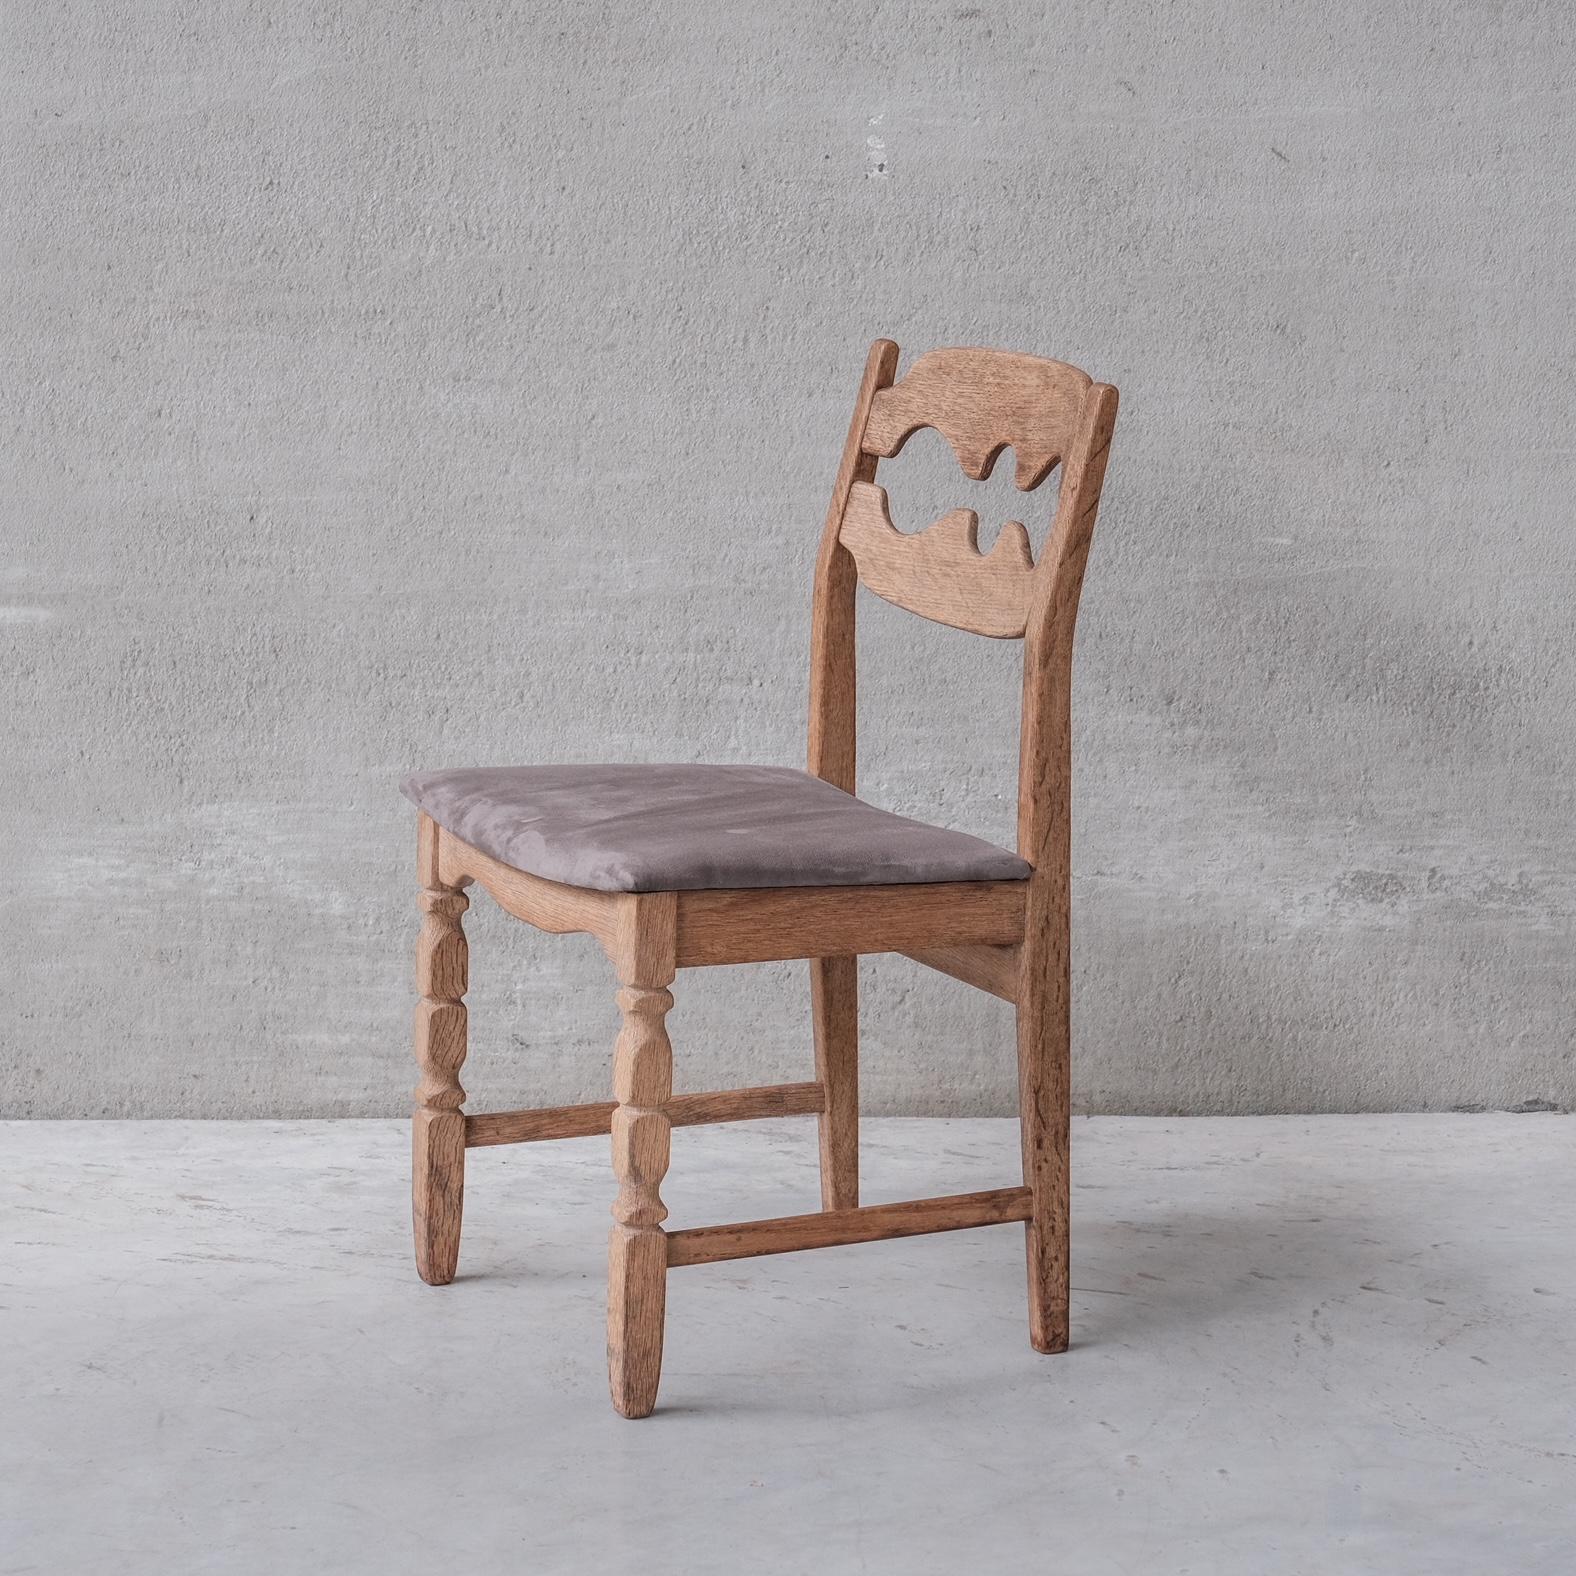 Oak dining chairs by Henning Kjaernulf.

Five available and priced as such, but we can sell as a set of 4 alternatively as well.

Denmark, circa 1960s.

'Razor back' or 'Razor blade' model.

Original patina and finish.

The upholstery